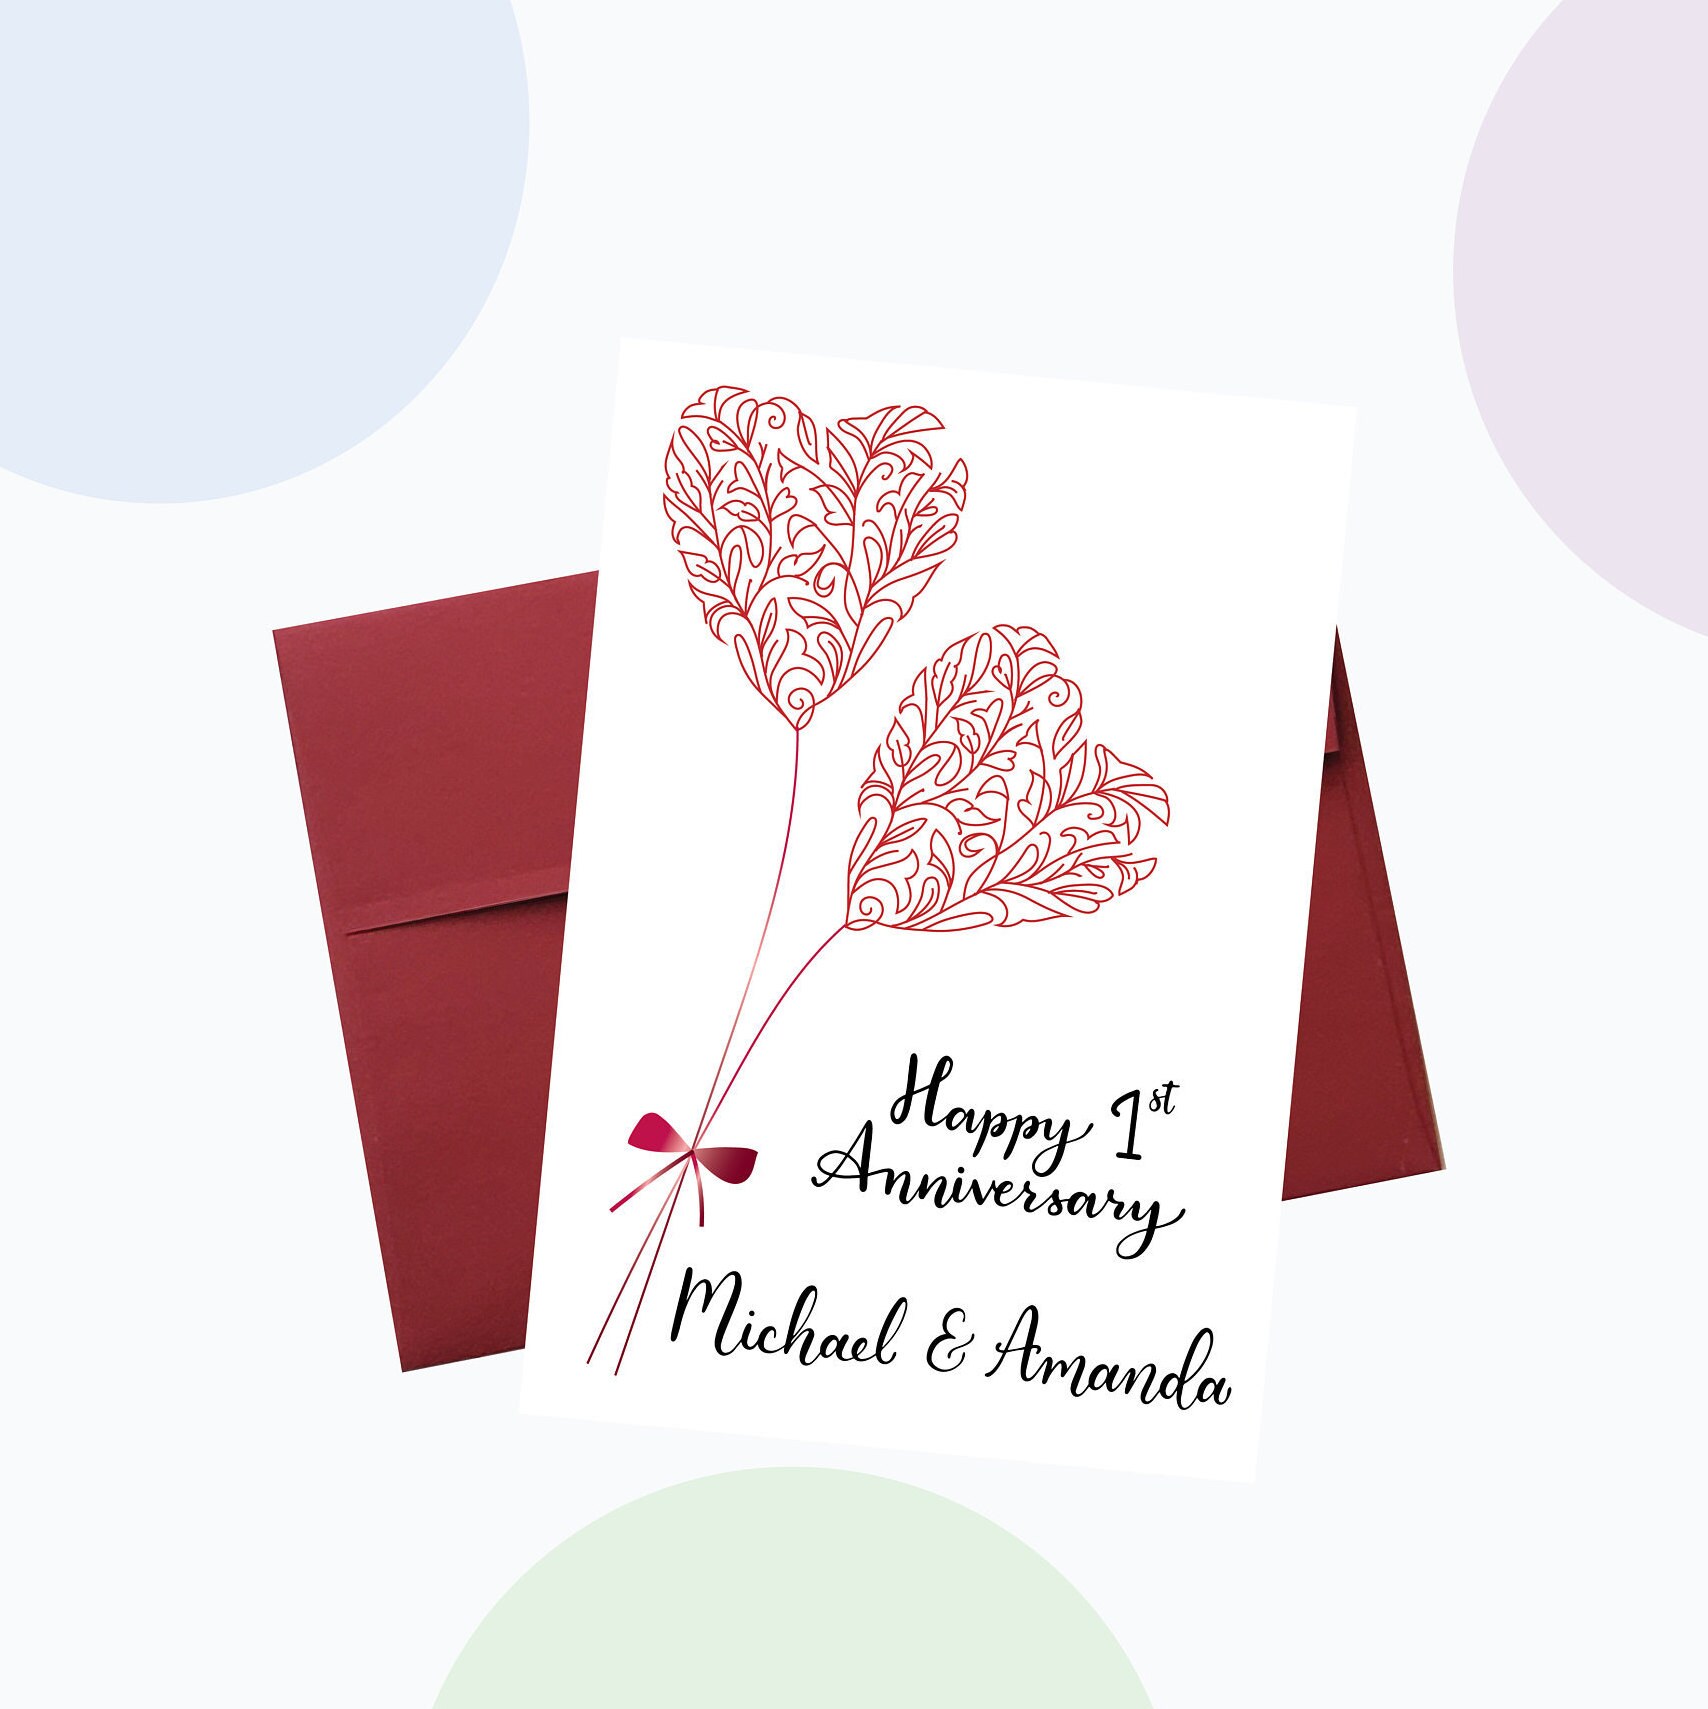 Personalized Anniversary Card Personalize Anniversary Year - Etsy